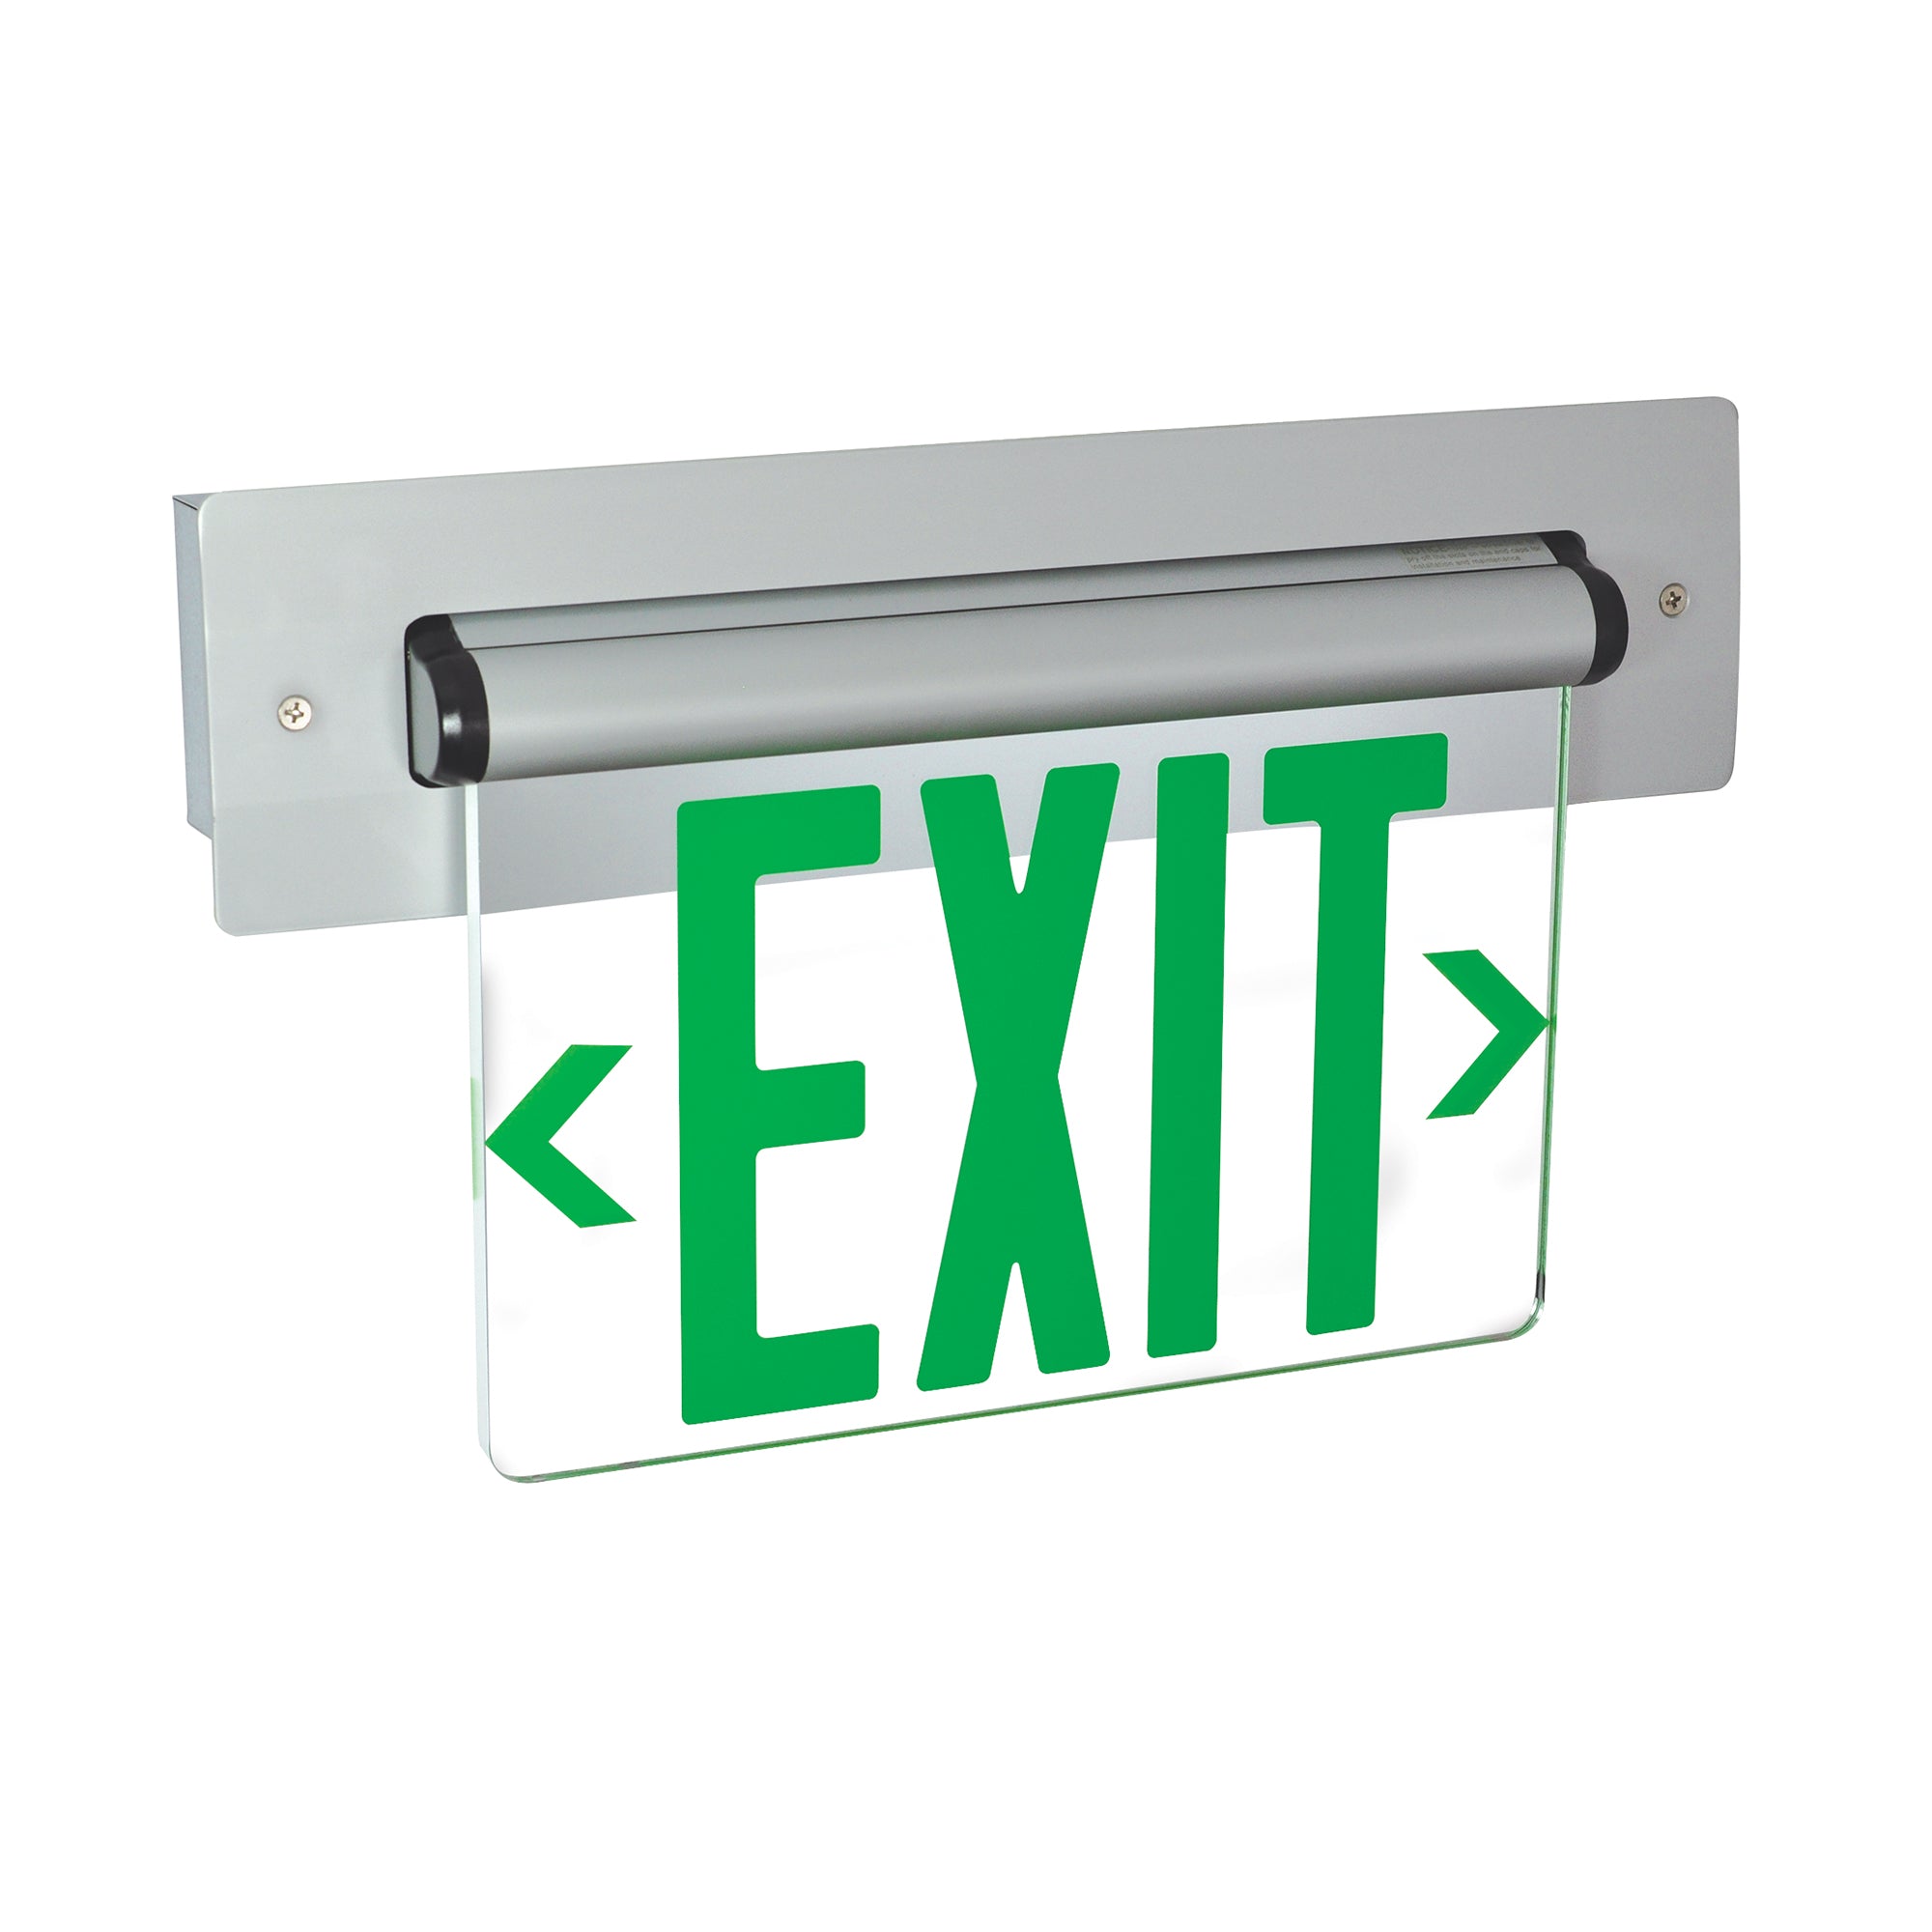 Nora Lighting NX-815-LEDGCA - Exit / Emergency - Recessed Adjustable LED Edge-Lit Exit Sign, Battery Backup, 6 Inch Green Letters, Single Face / Clear Acrylic, Aluminum Housing